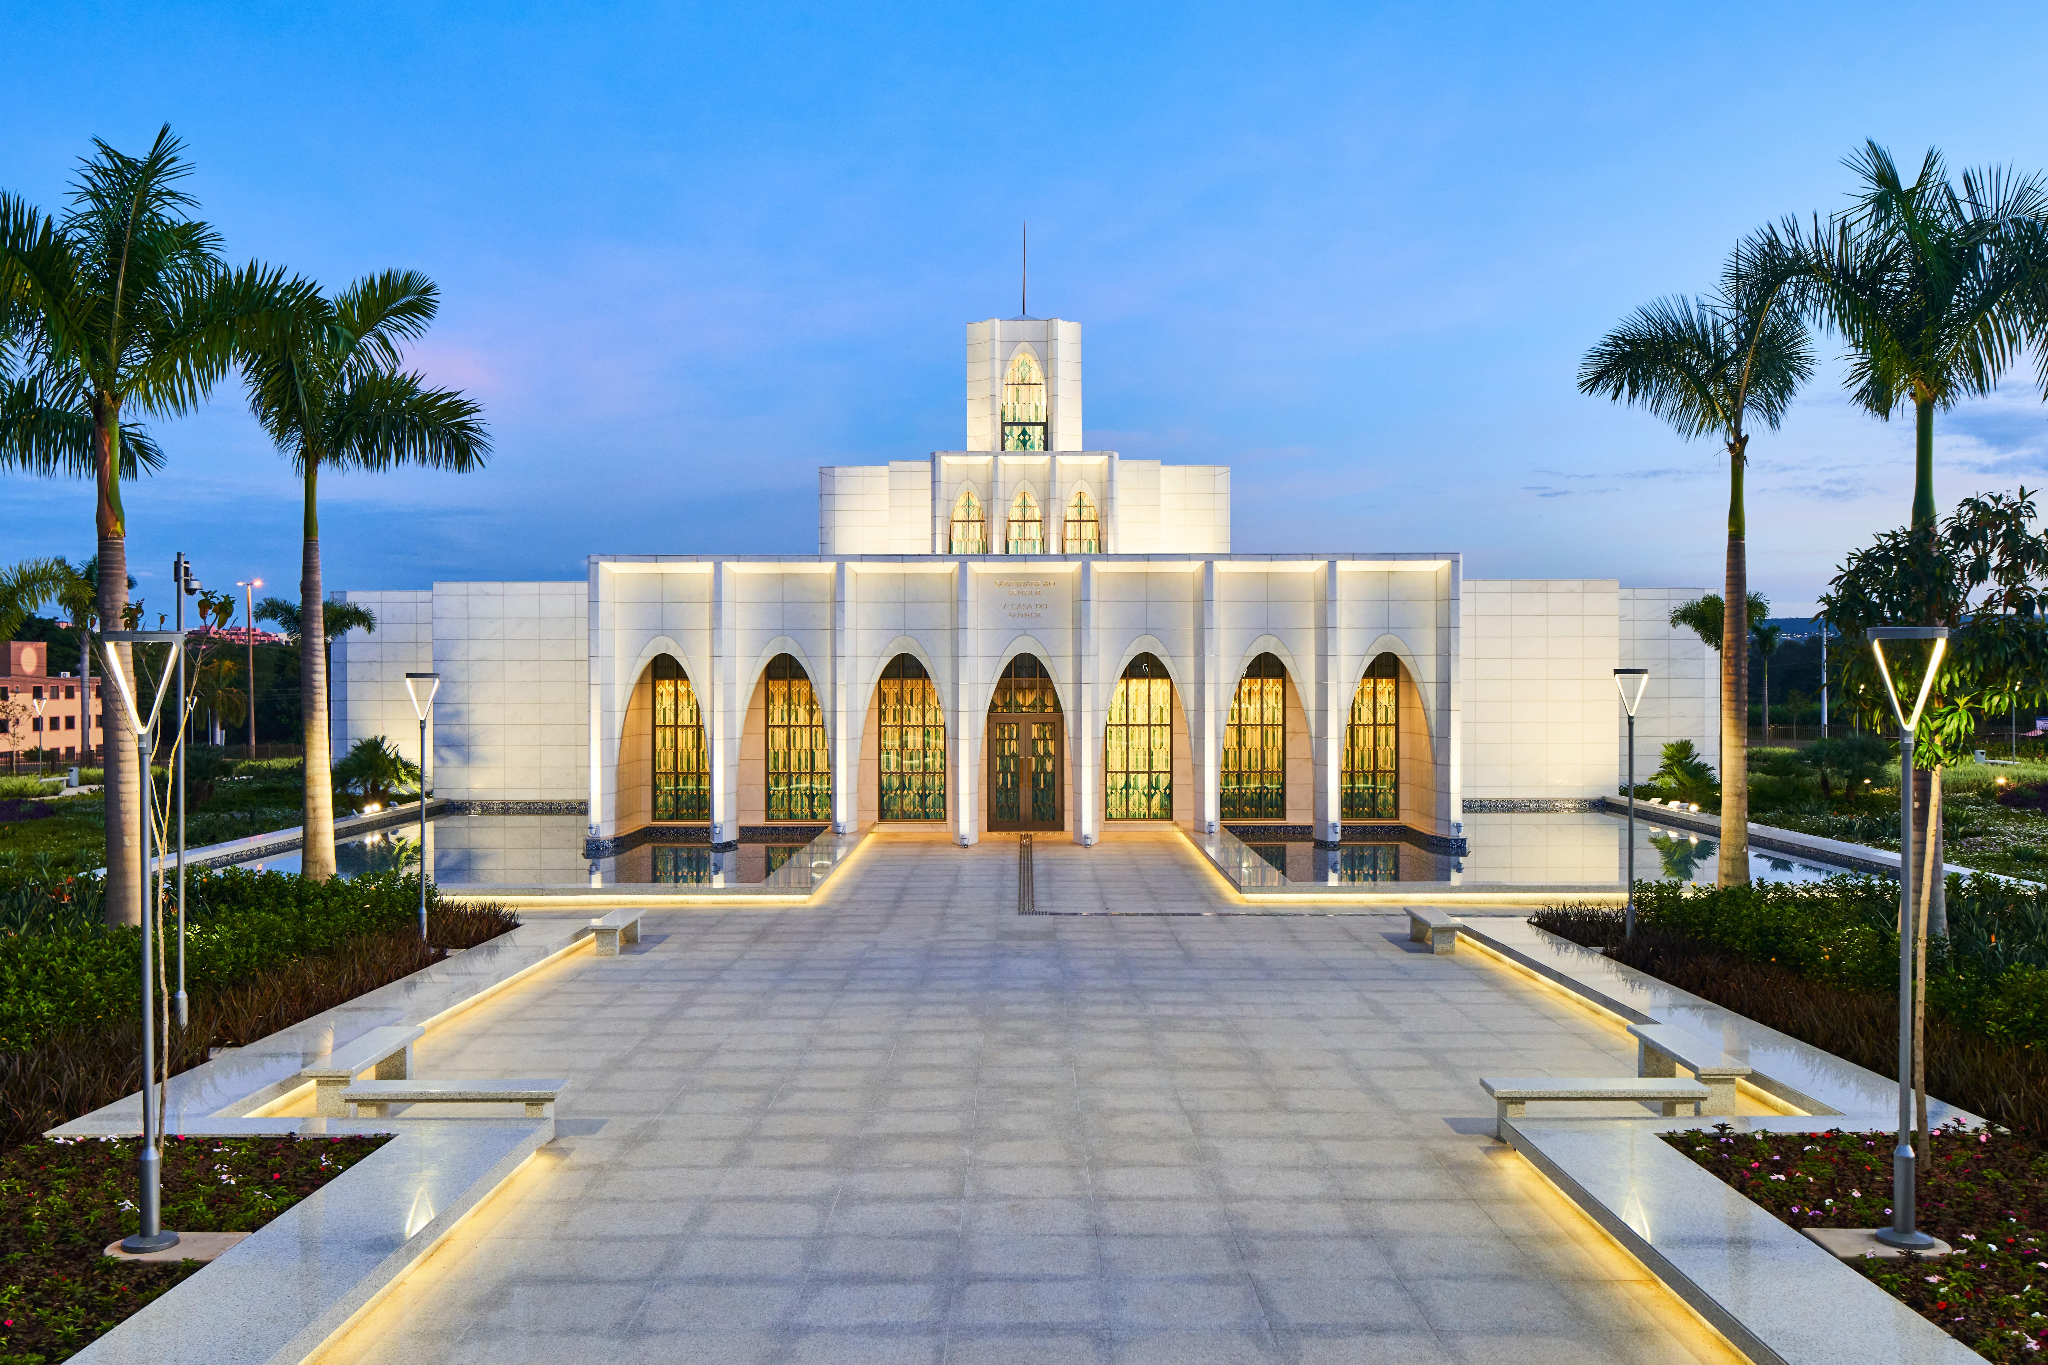 The exterior of the Brasília Brazil Temple, a white building surrounded by archways.